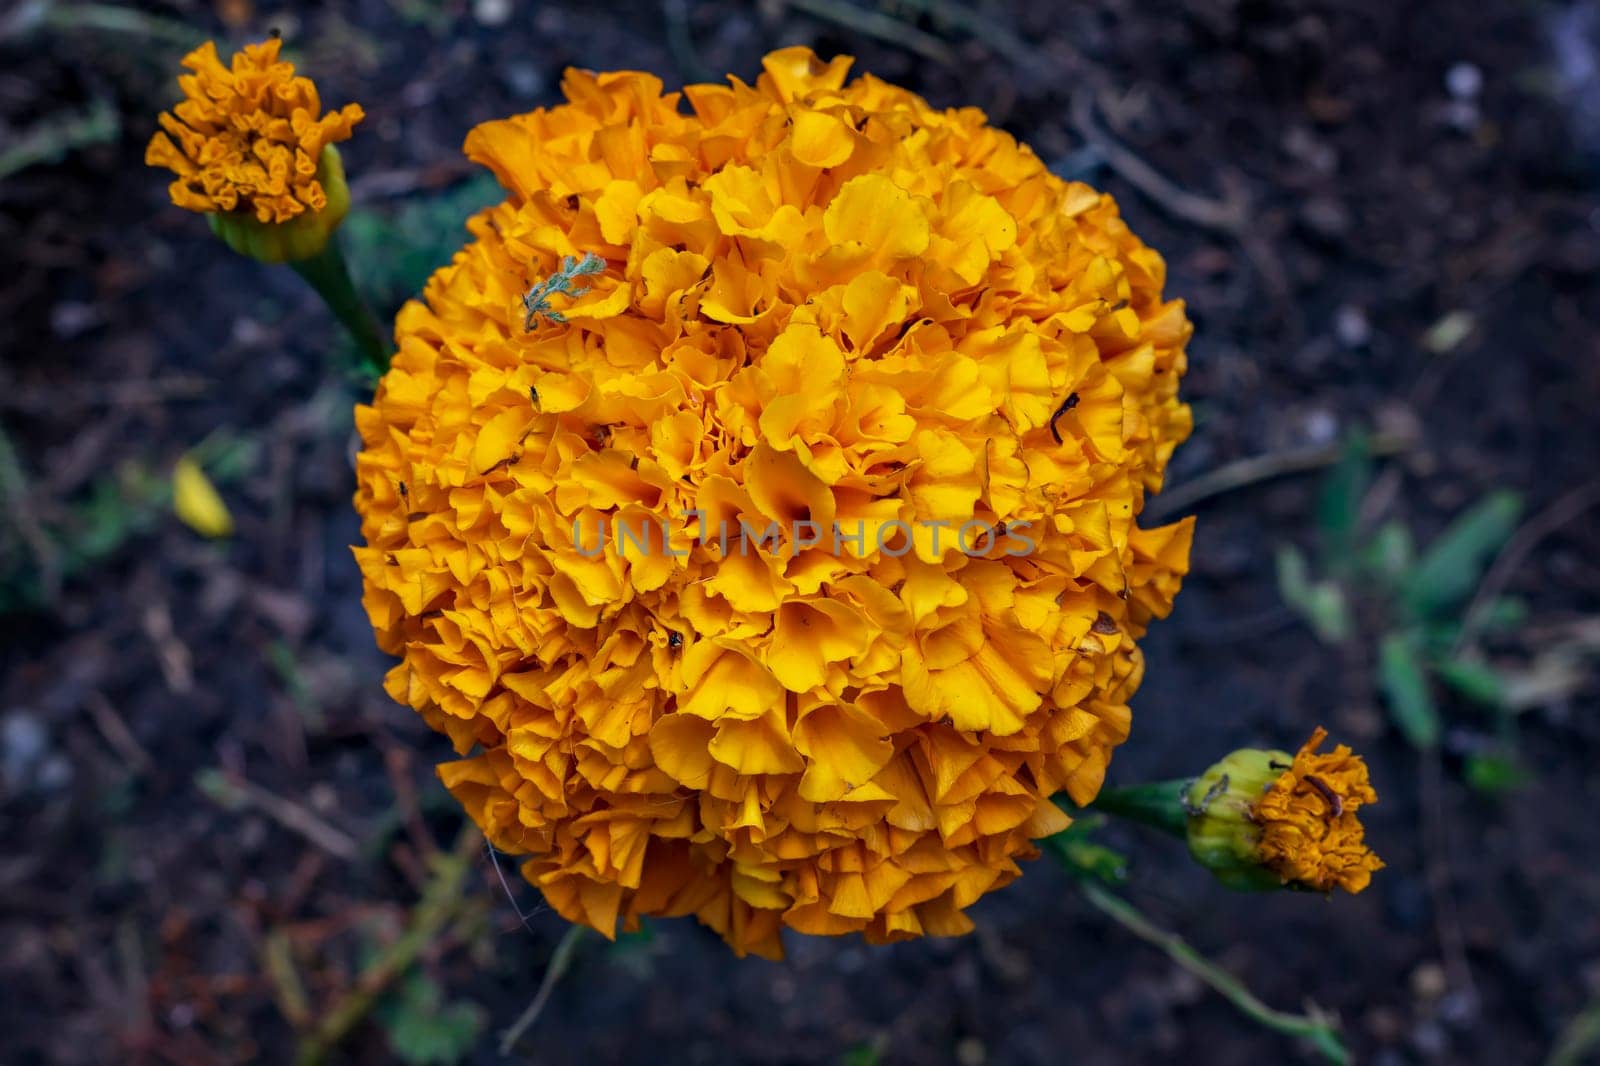 Marigolds, Tagetes erecta flowers in the garden close up by EdVal